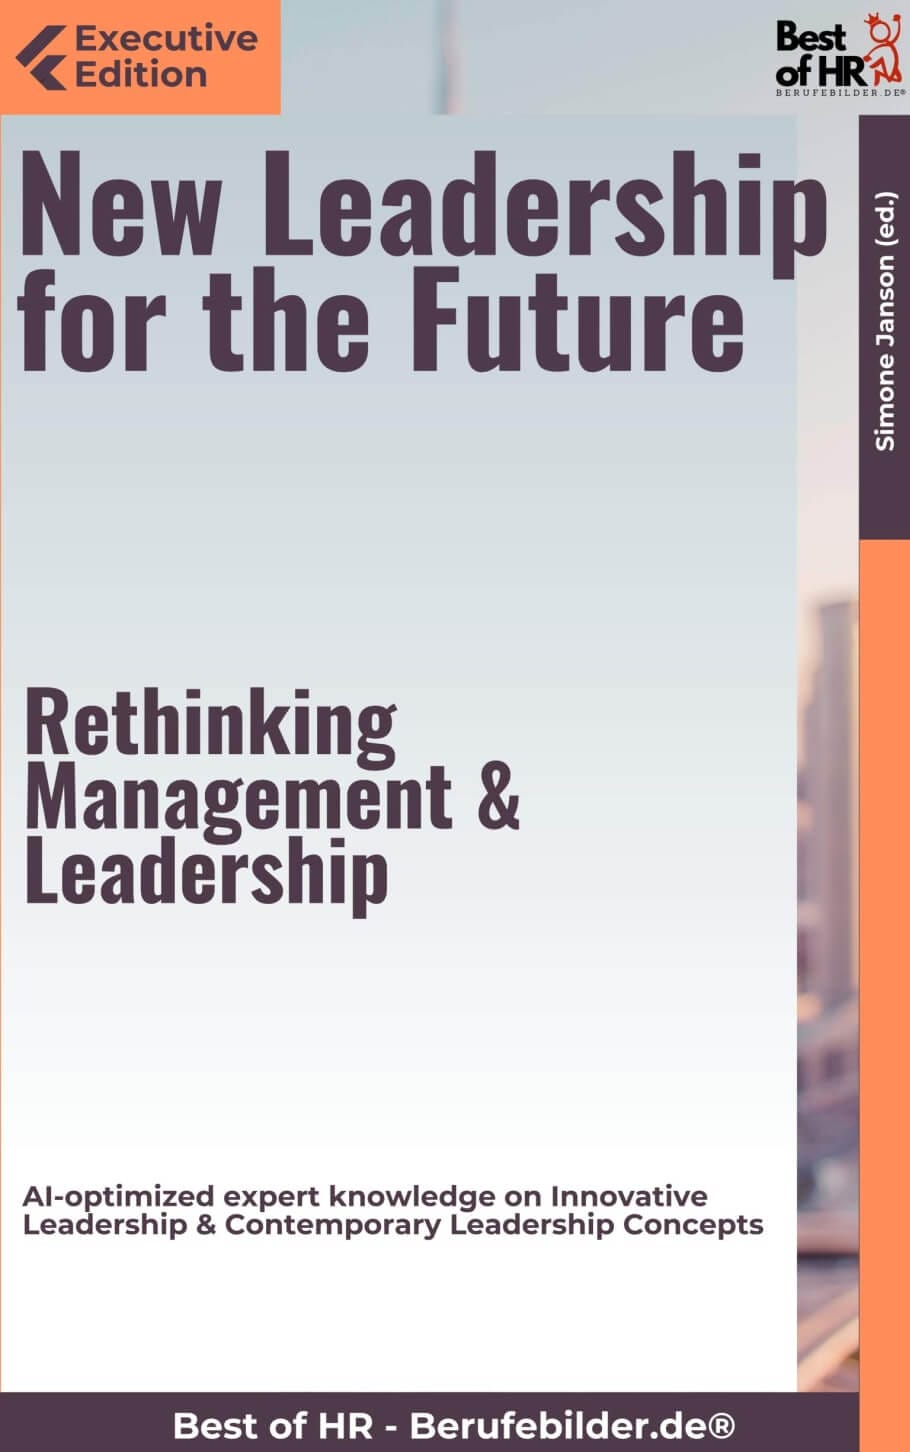 New Leadership for the Future – Rethinking Management & Leadership (Engl. Version)